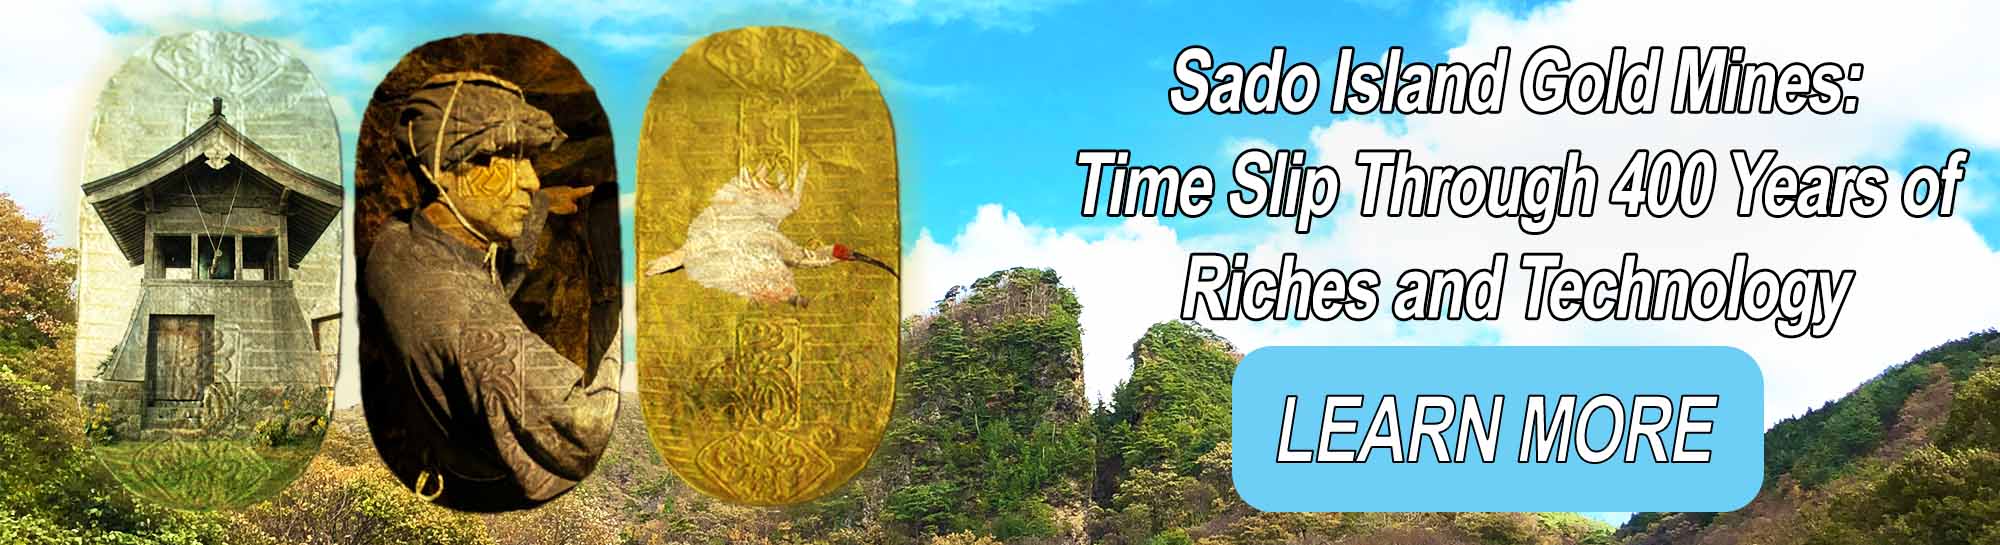 Sado Island Gold Mines: Time Slip Through 400 Years of Riches and Technology